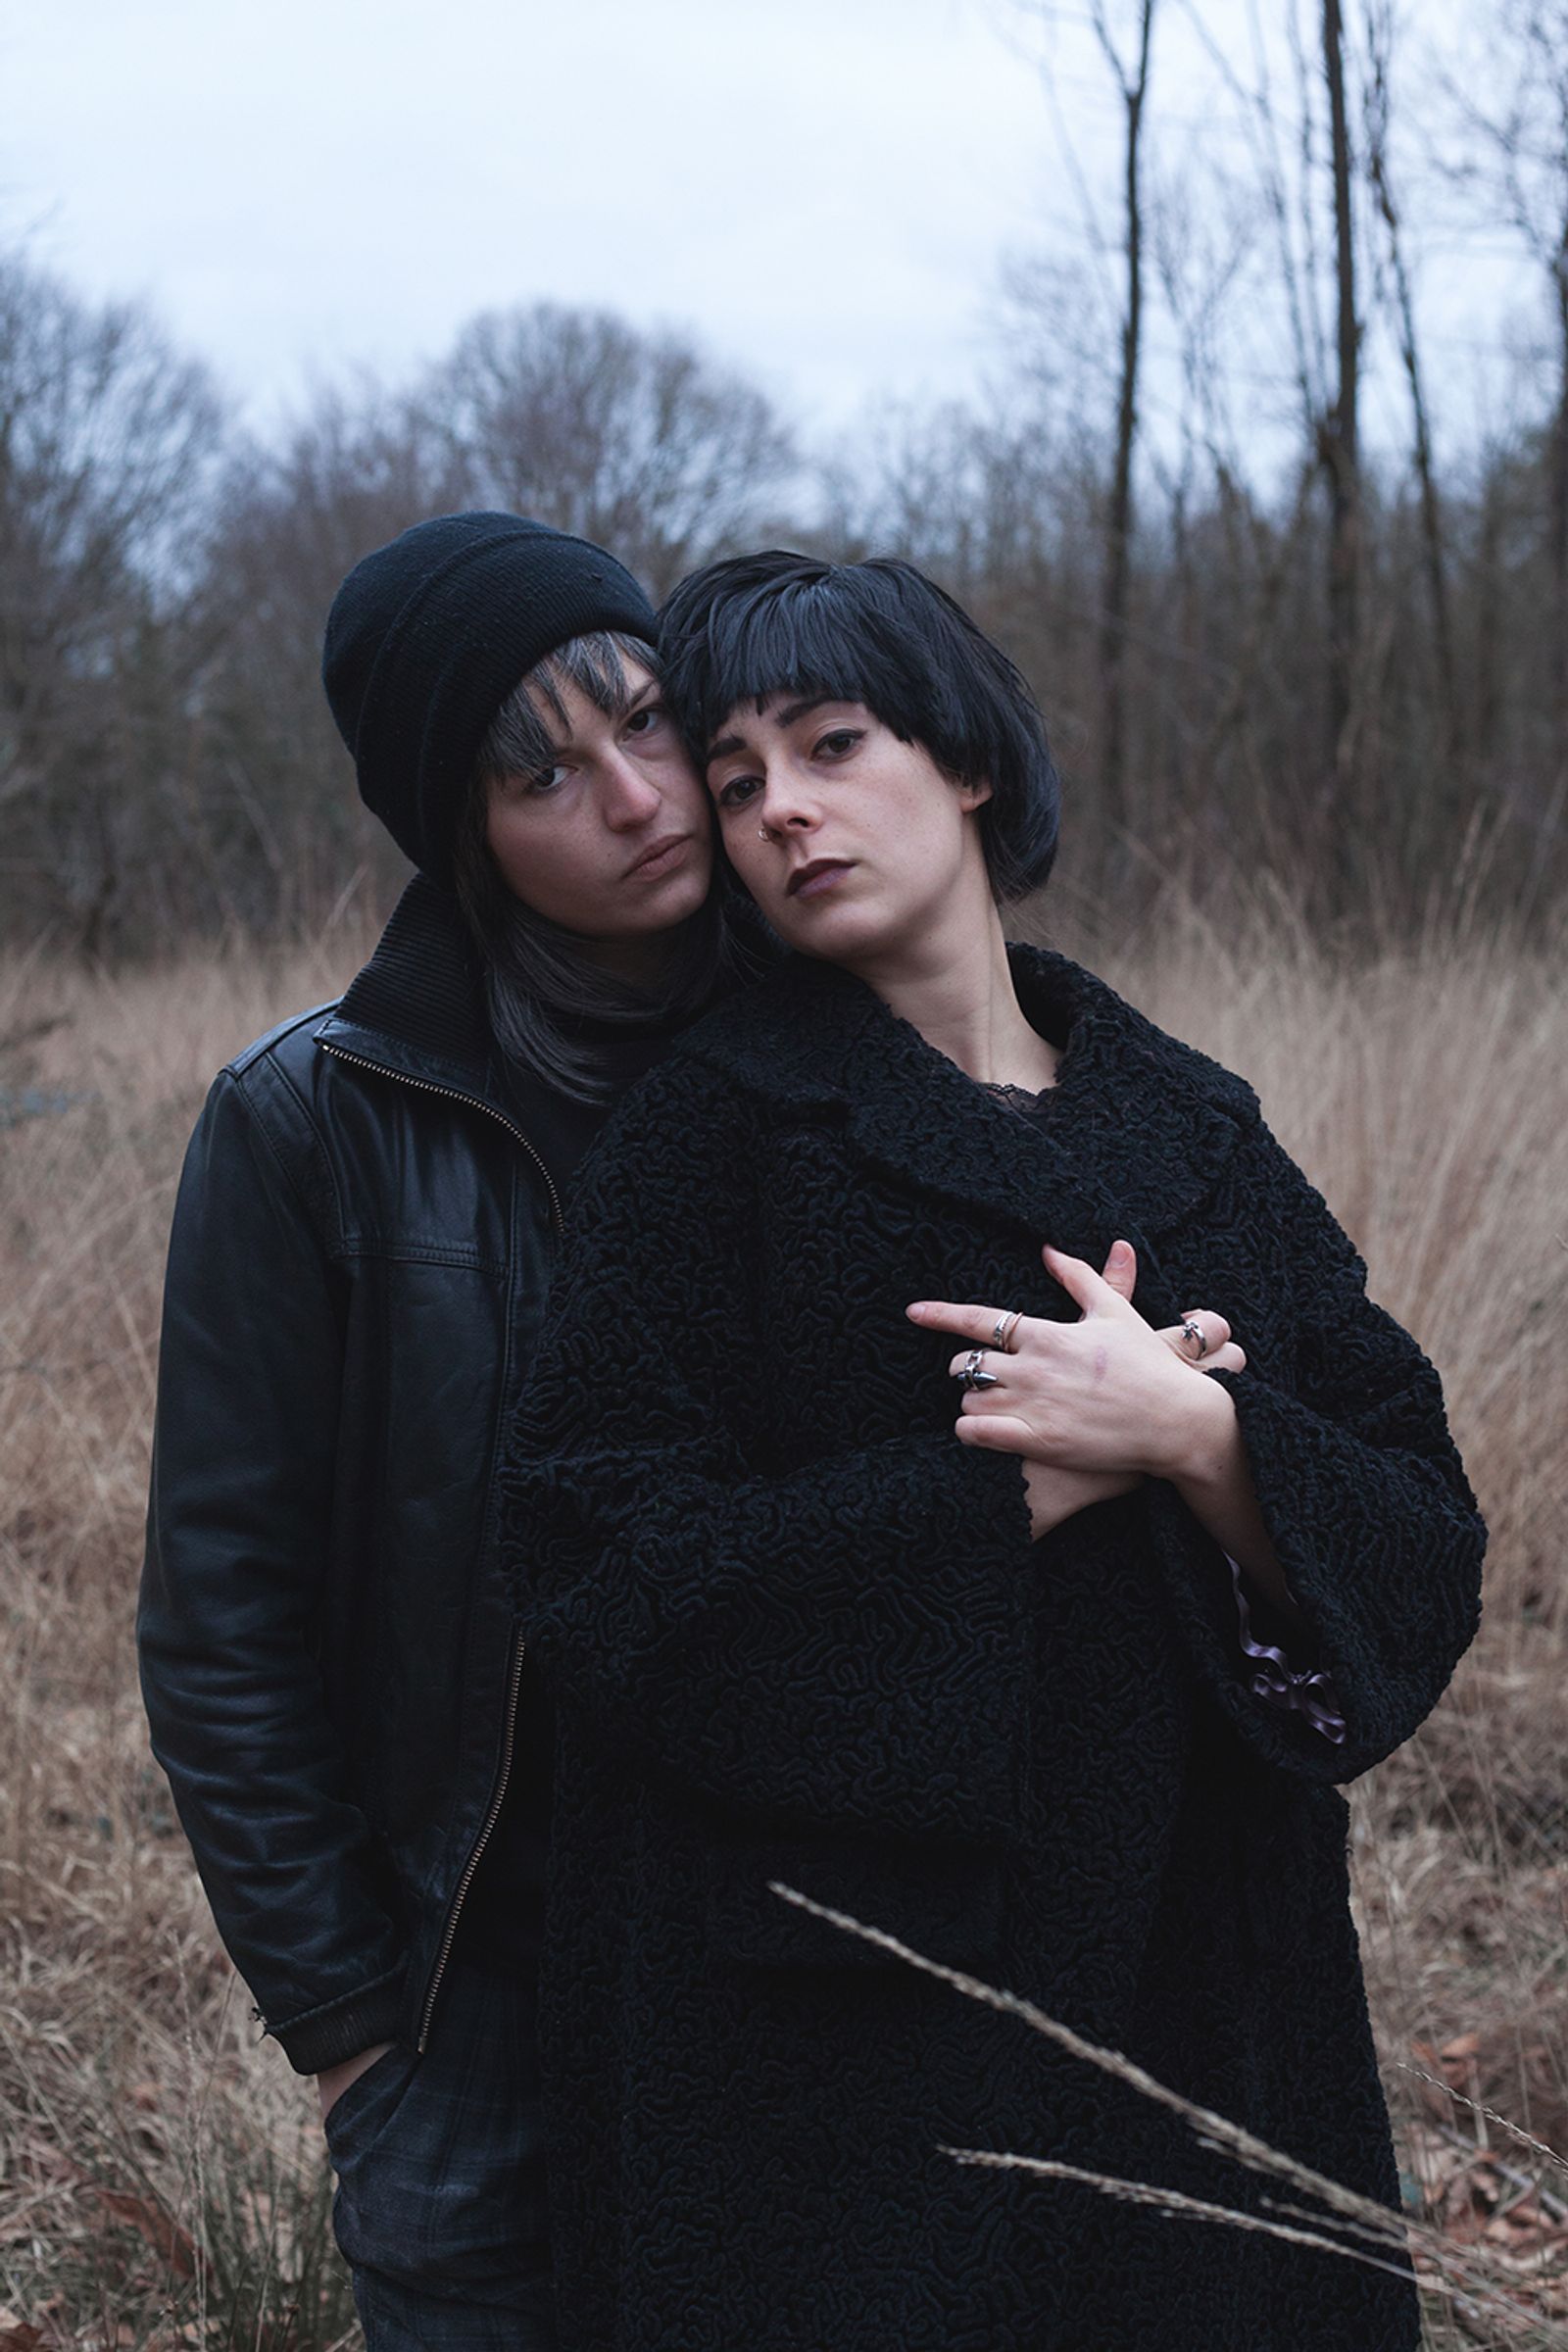 © ELSA & JOHANNA - Image from the A Couple of Them photography project